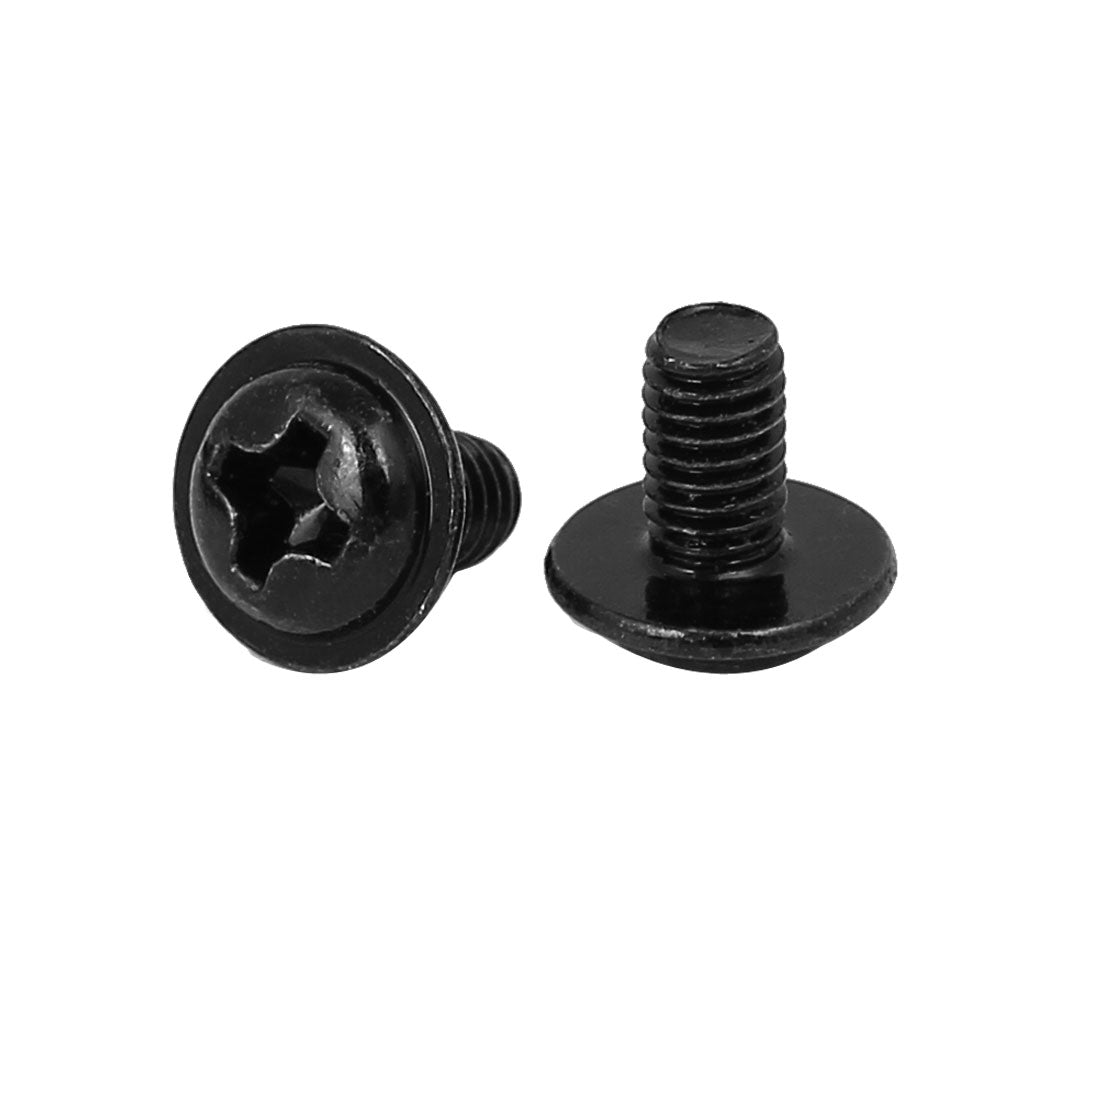 uxcell Uxcell Computer PC Case Phillips Washer Motherboard Screw Black PWM3 x 5mm 100pcs